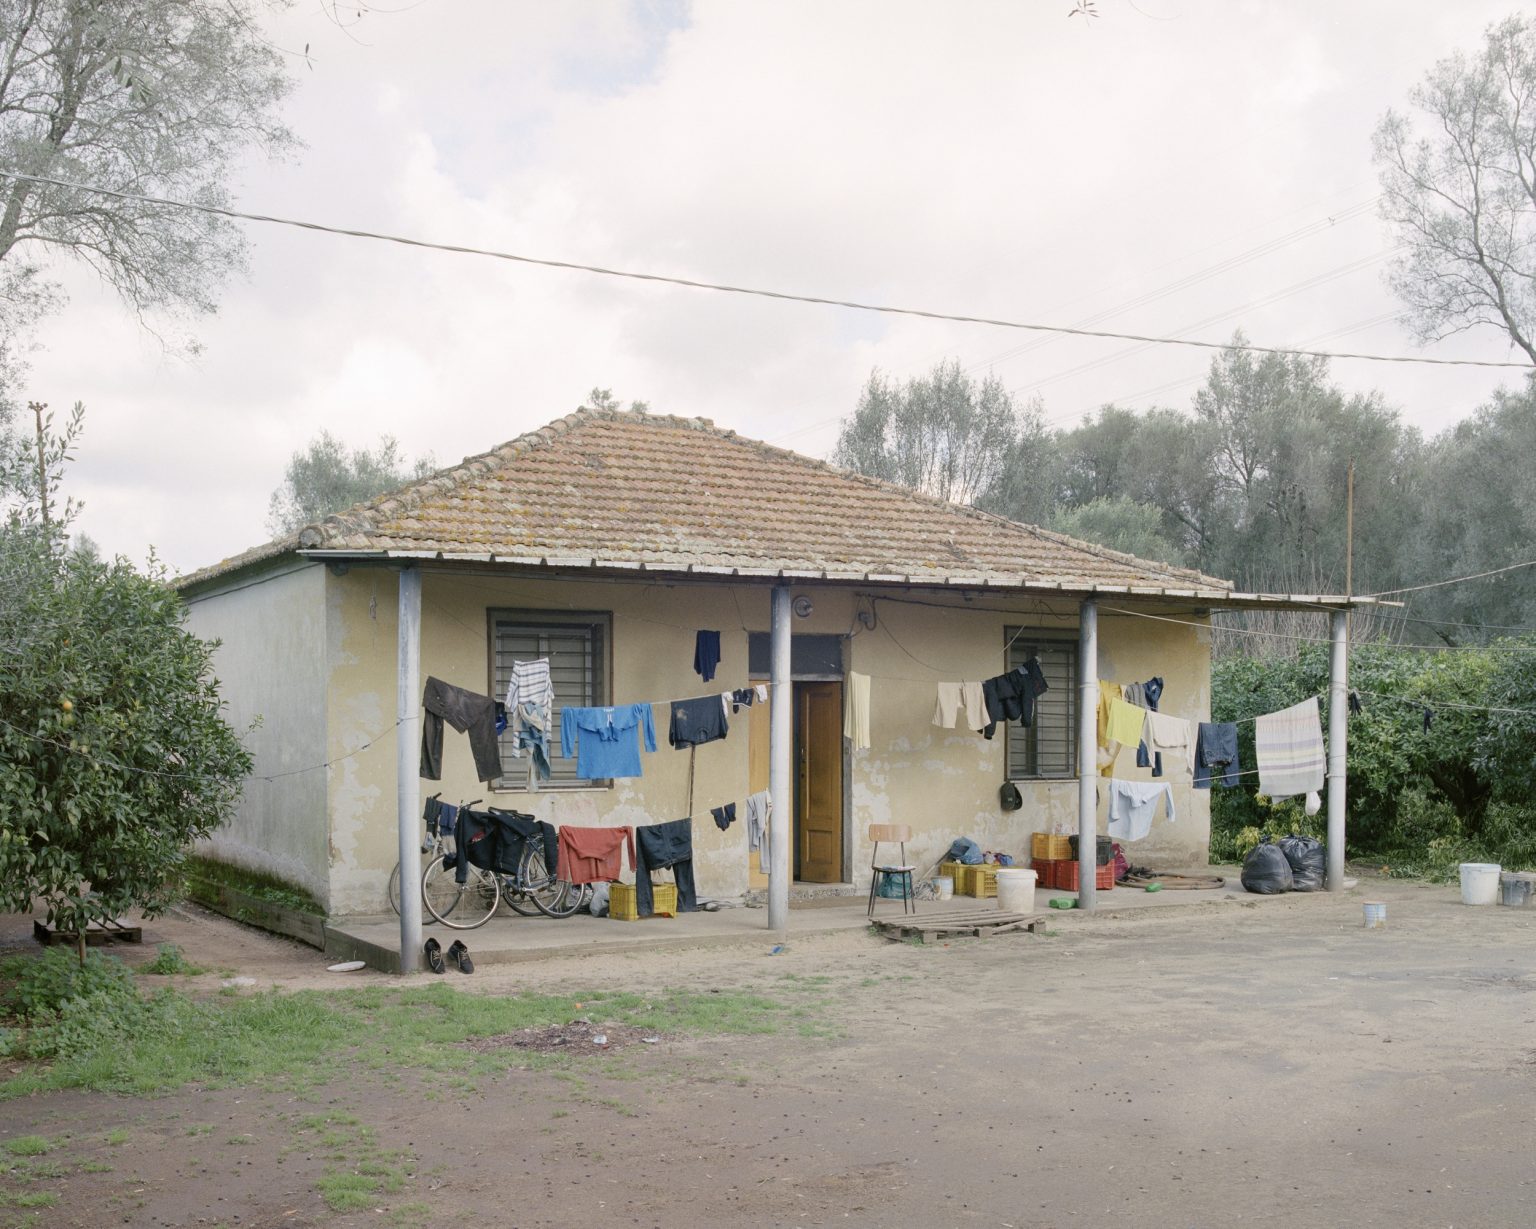 Drosi (Gioia Tauro), 2016. Temporary shelter set in a citrus grove in the plain of Gioia Tauro. According to CGIL (union organization) in Italy there are about 400 thousand foreign daily laboures who find work through the caporalato (system of directly hiring farm labour for very low wages by landowner's agents). ><
Drosi (Gioia Tauro), 2016. Rifugio temporaneo in un agrumeto della piana di Gioia Tauro. Secondo la CGIL in Italia sono circa 400 mila i lavoratori stagionali stranieri che trovano lavoro attraverso il caporalato.